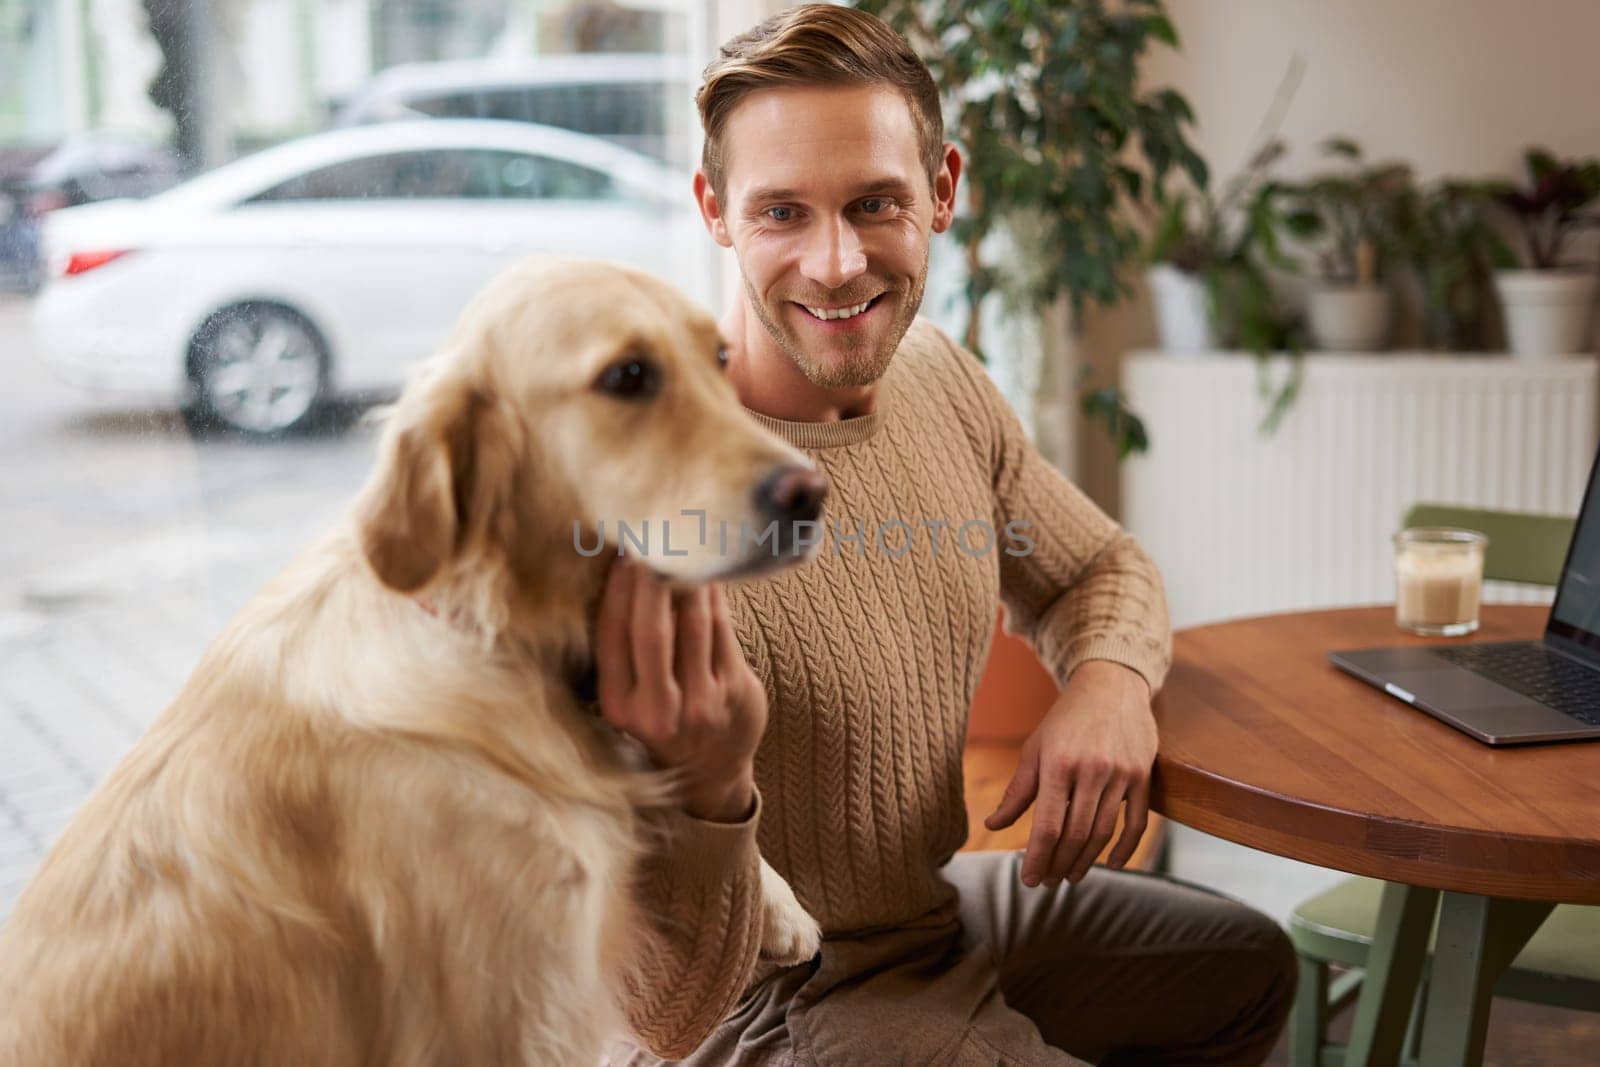 Close up portrait of smiling handsome european man with his dog in a cafe. Guy pets his golden retriever while working outdoors in coffee shop.